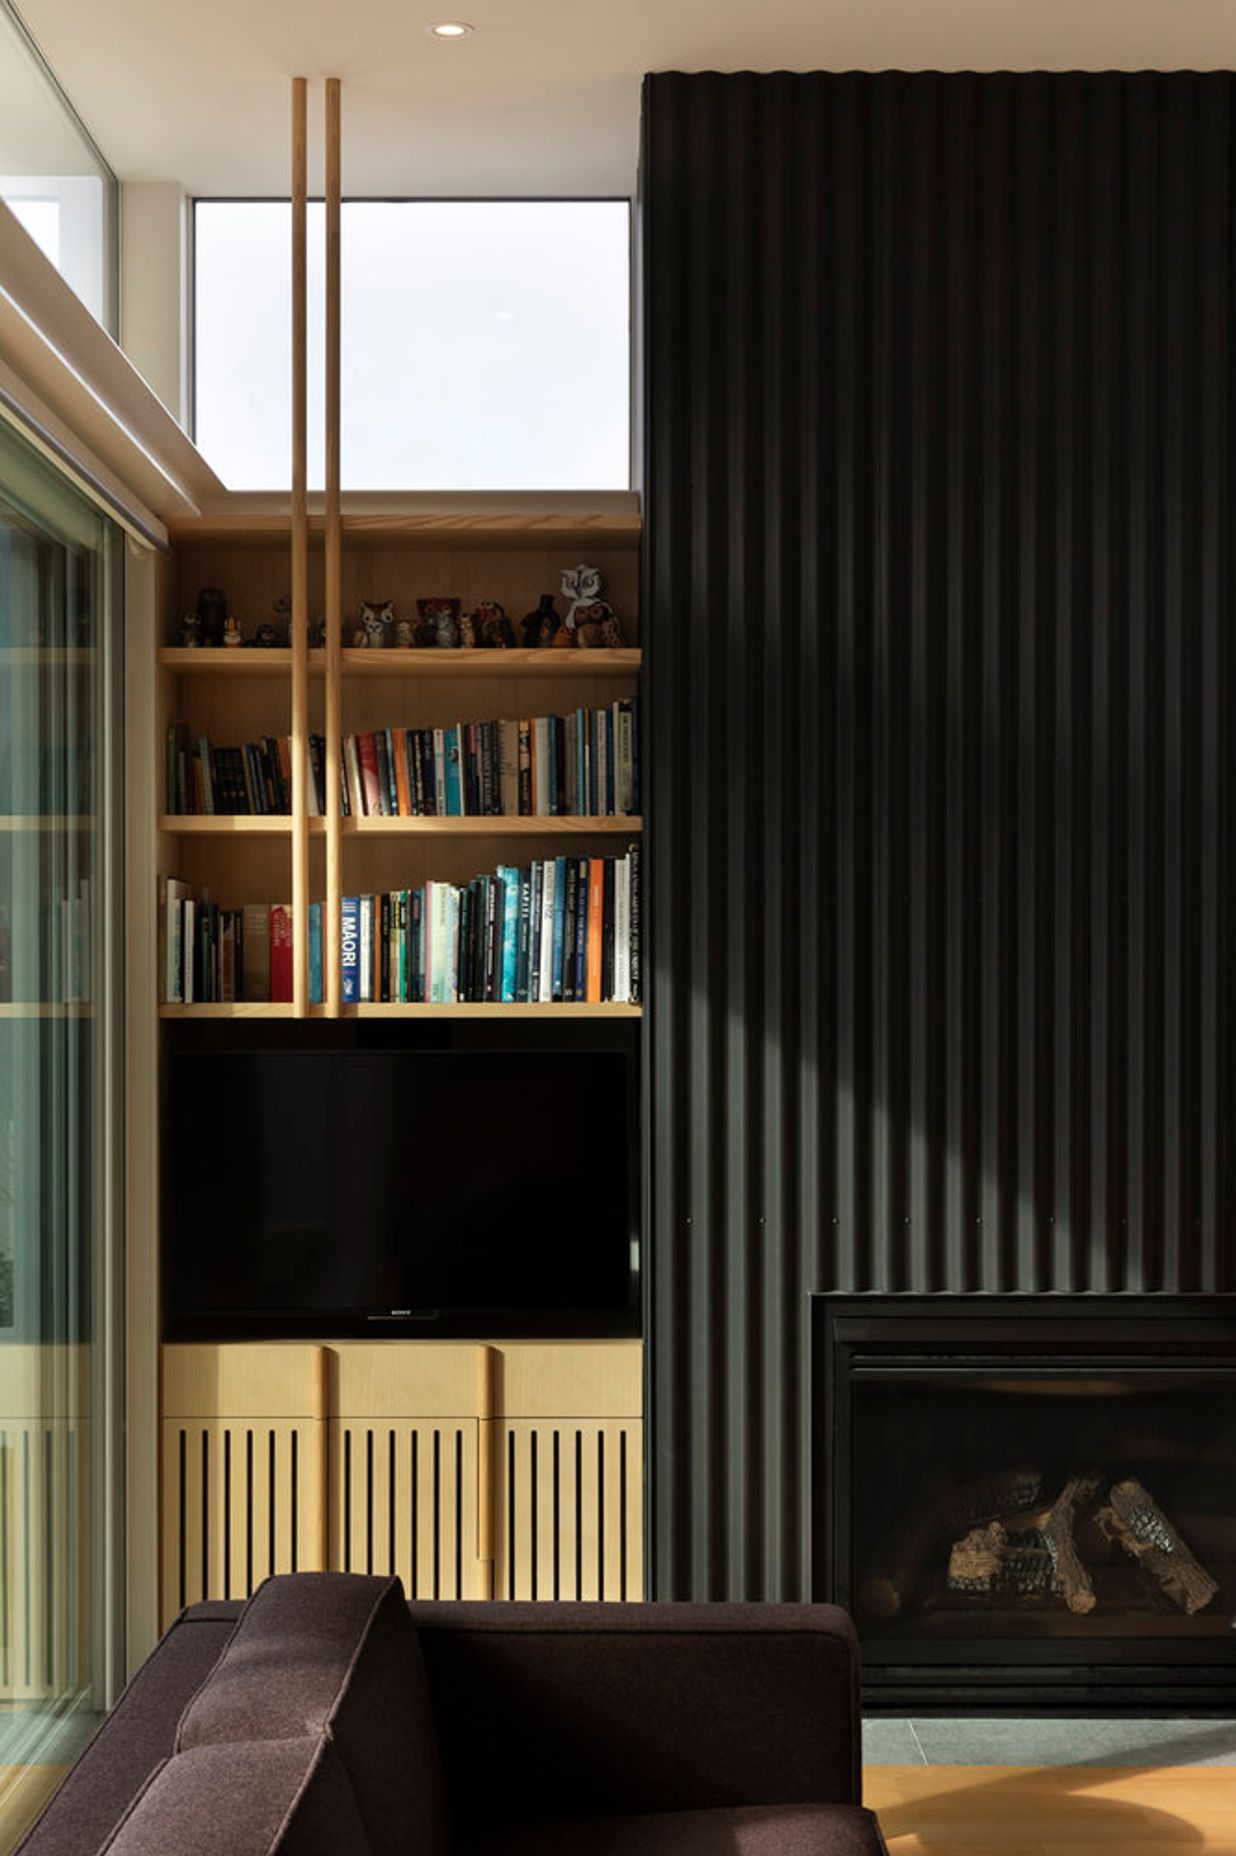 The house features bespoke American ash cabinetry designed by the architect.